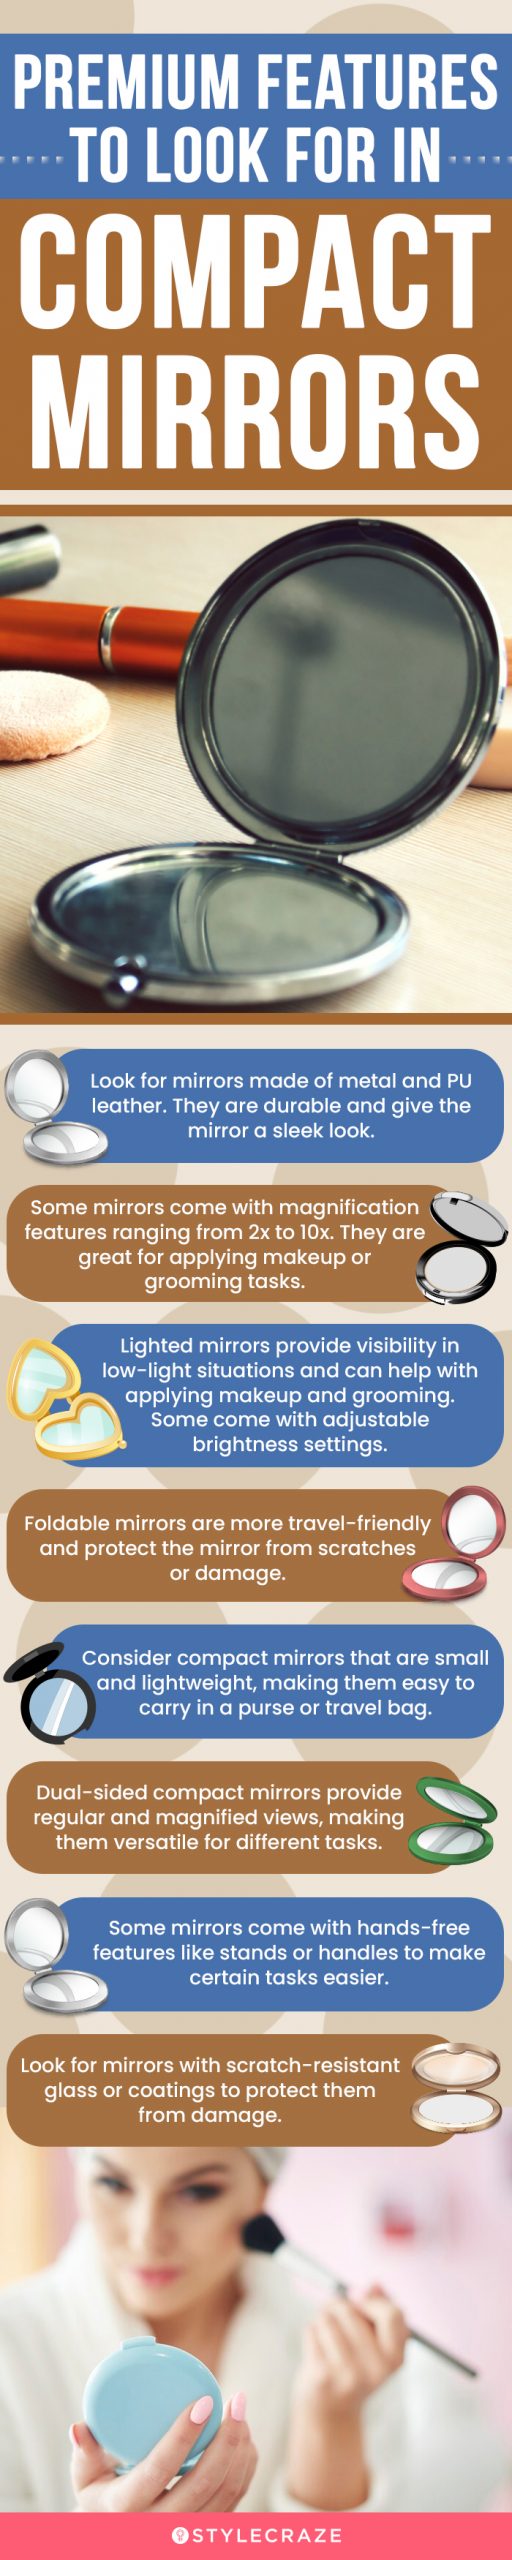 Premium Features To Look For In Compact Mirrors (infographic)